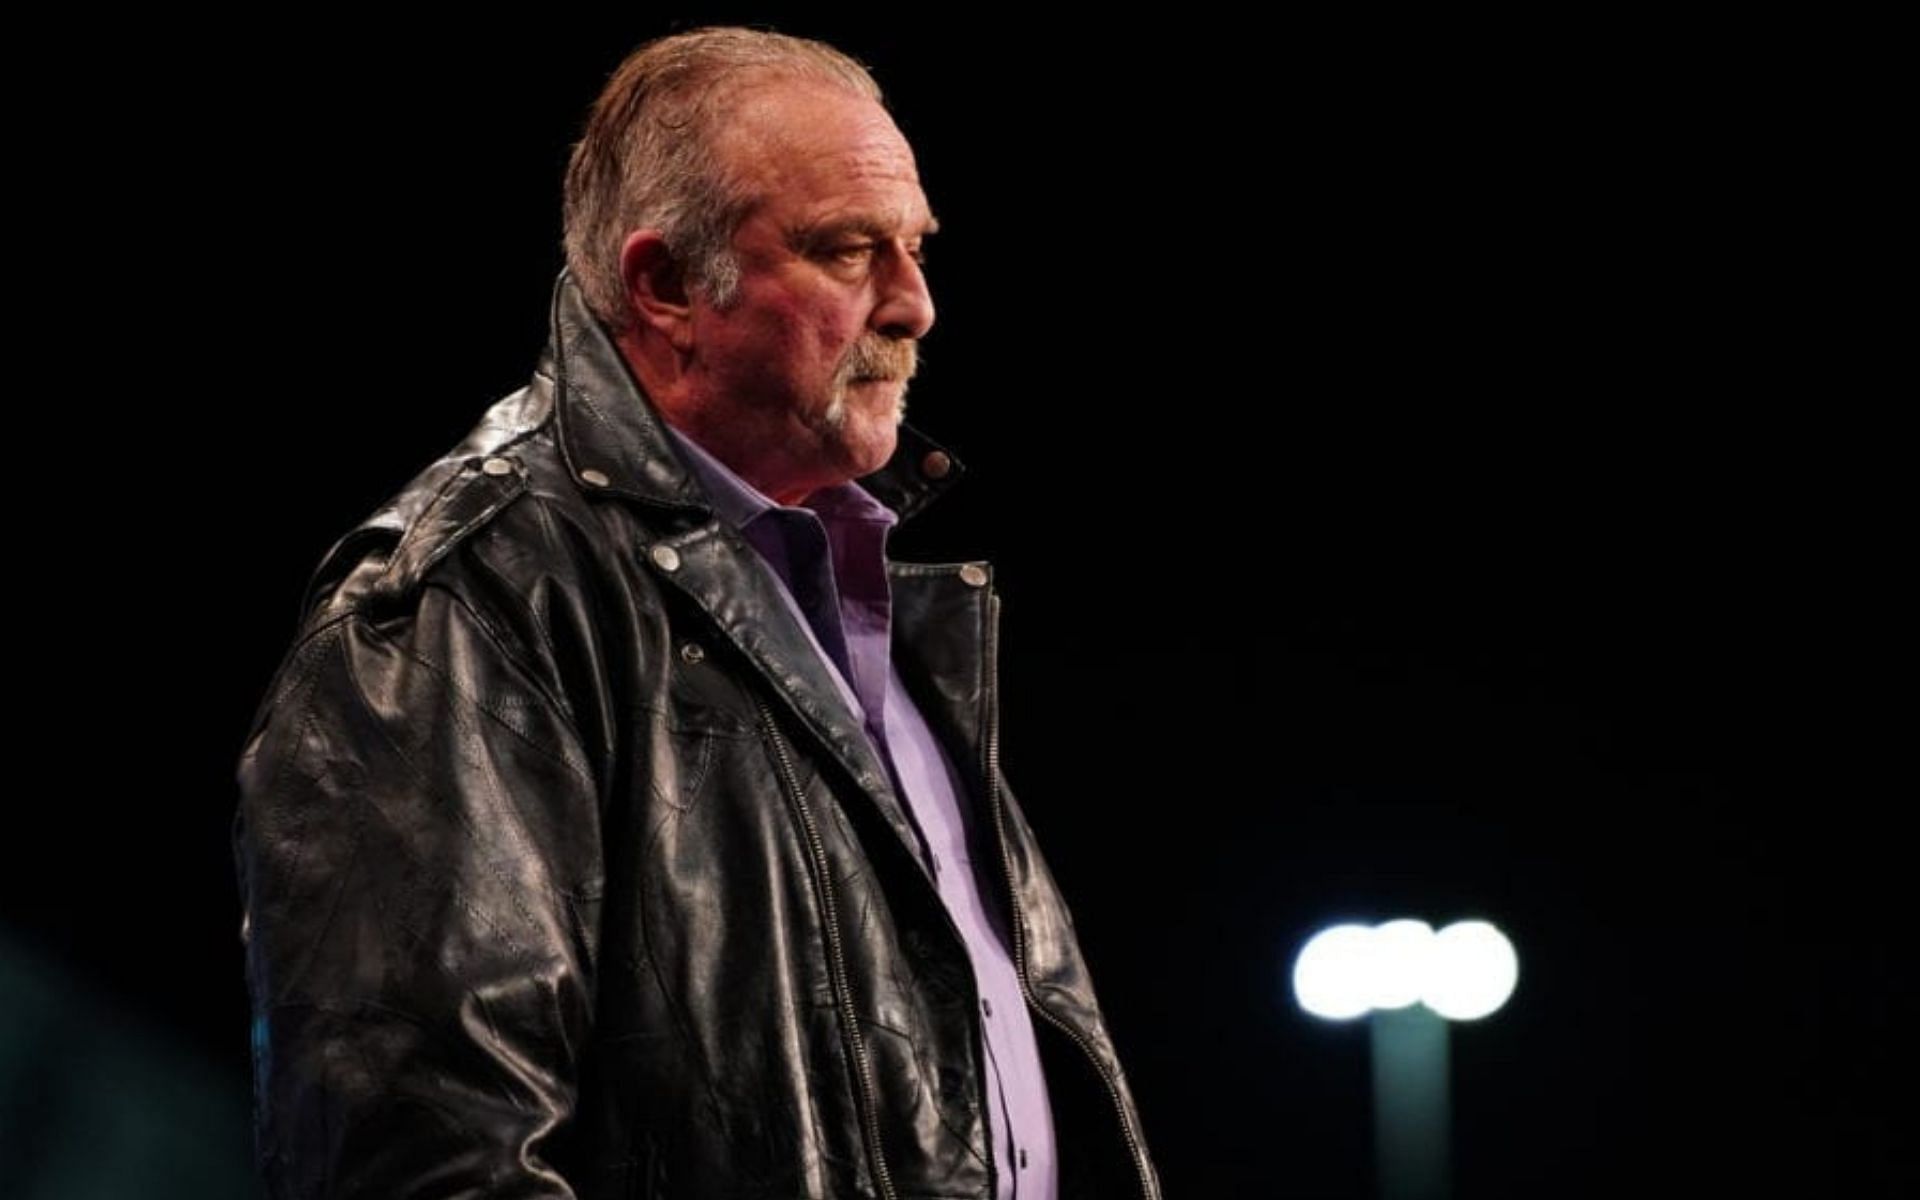 Jake Roberts asked Vince McMahon to fire Michaels and Hart.